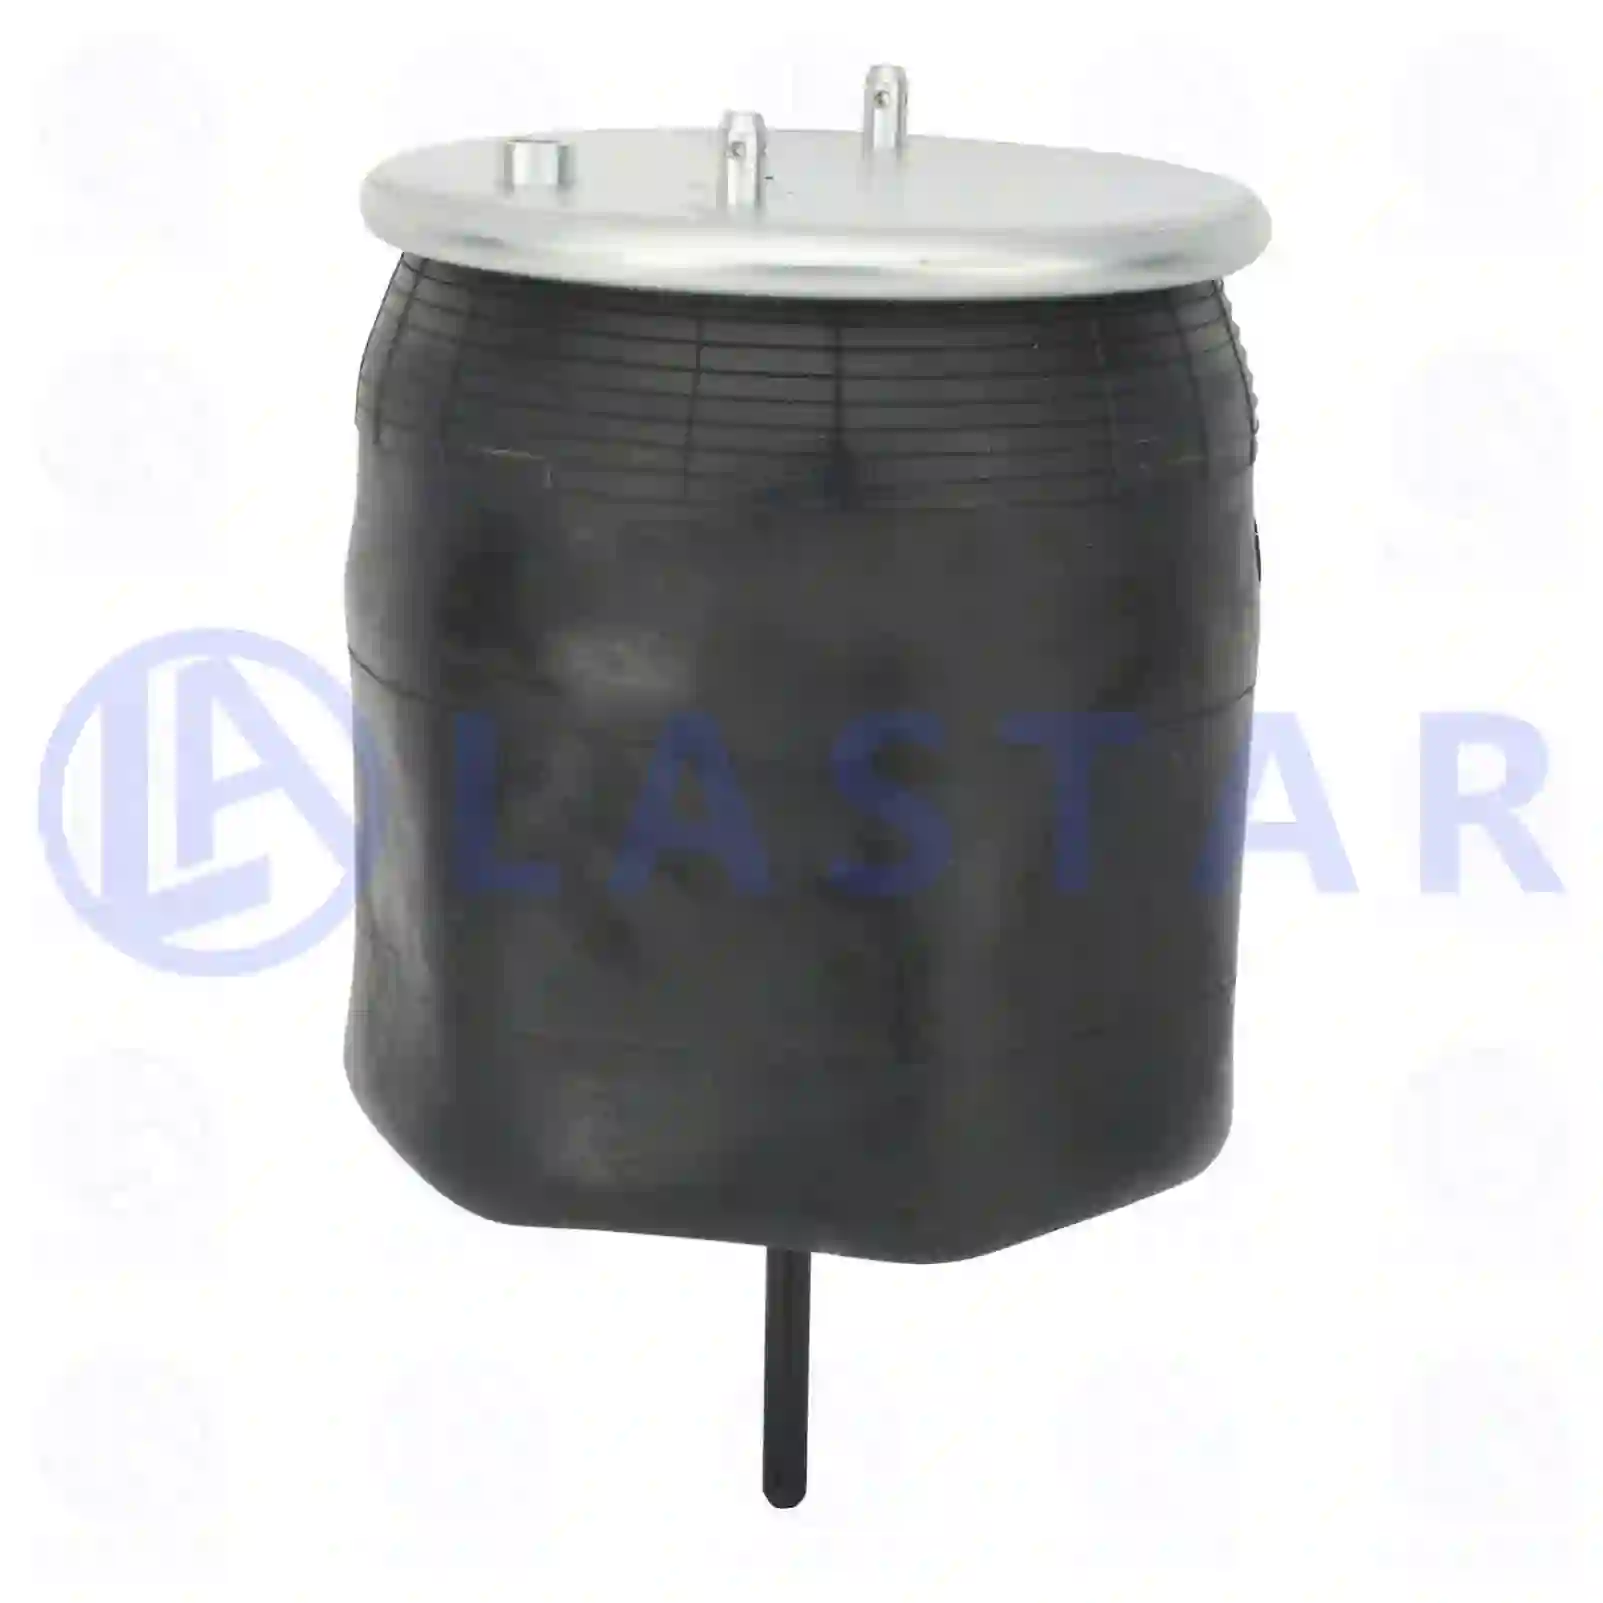 Air spring, with steel piston, without adapter, 77730116, MLF7142, 1440304, 470922, ZG40802-0008 ||  77730116 Lastar Spare Part | Truck Spare Parts, Auotomotive Spare Parts Air spring, with steel piston, without adapter, 77730116, MLF7142, 1440304, 470922, ZG40802-0008 ||  77730116 Lastar Spare Part | Truck Spare Parts, Auotomotive Spare Parts